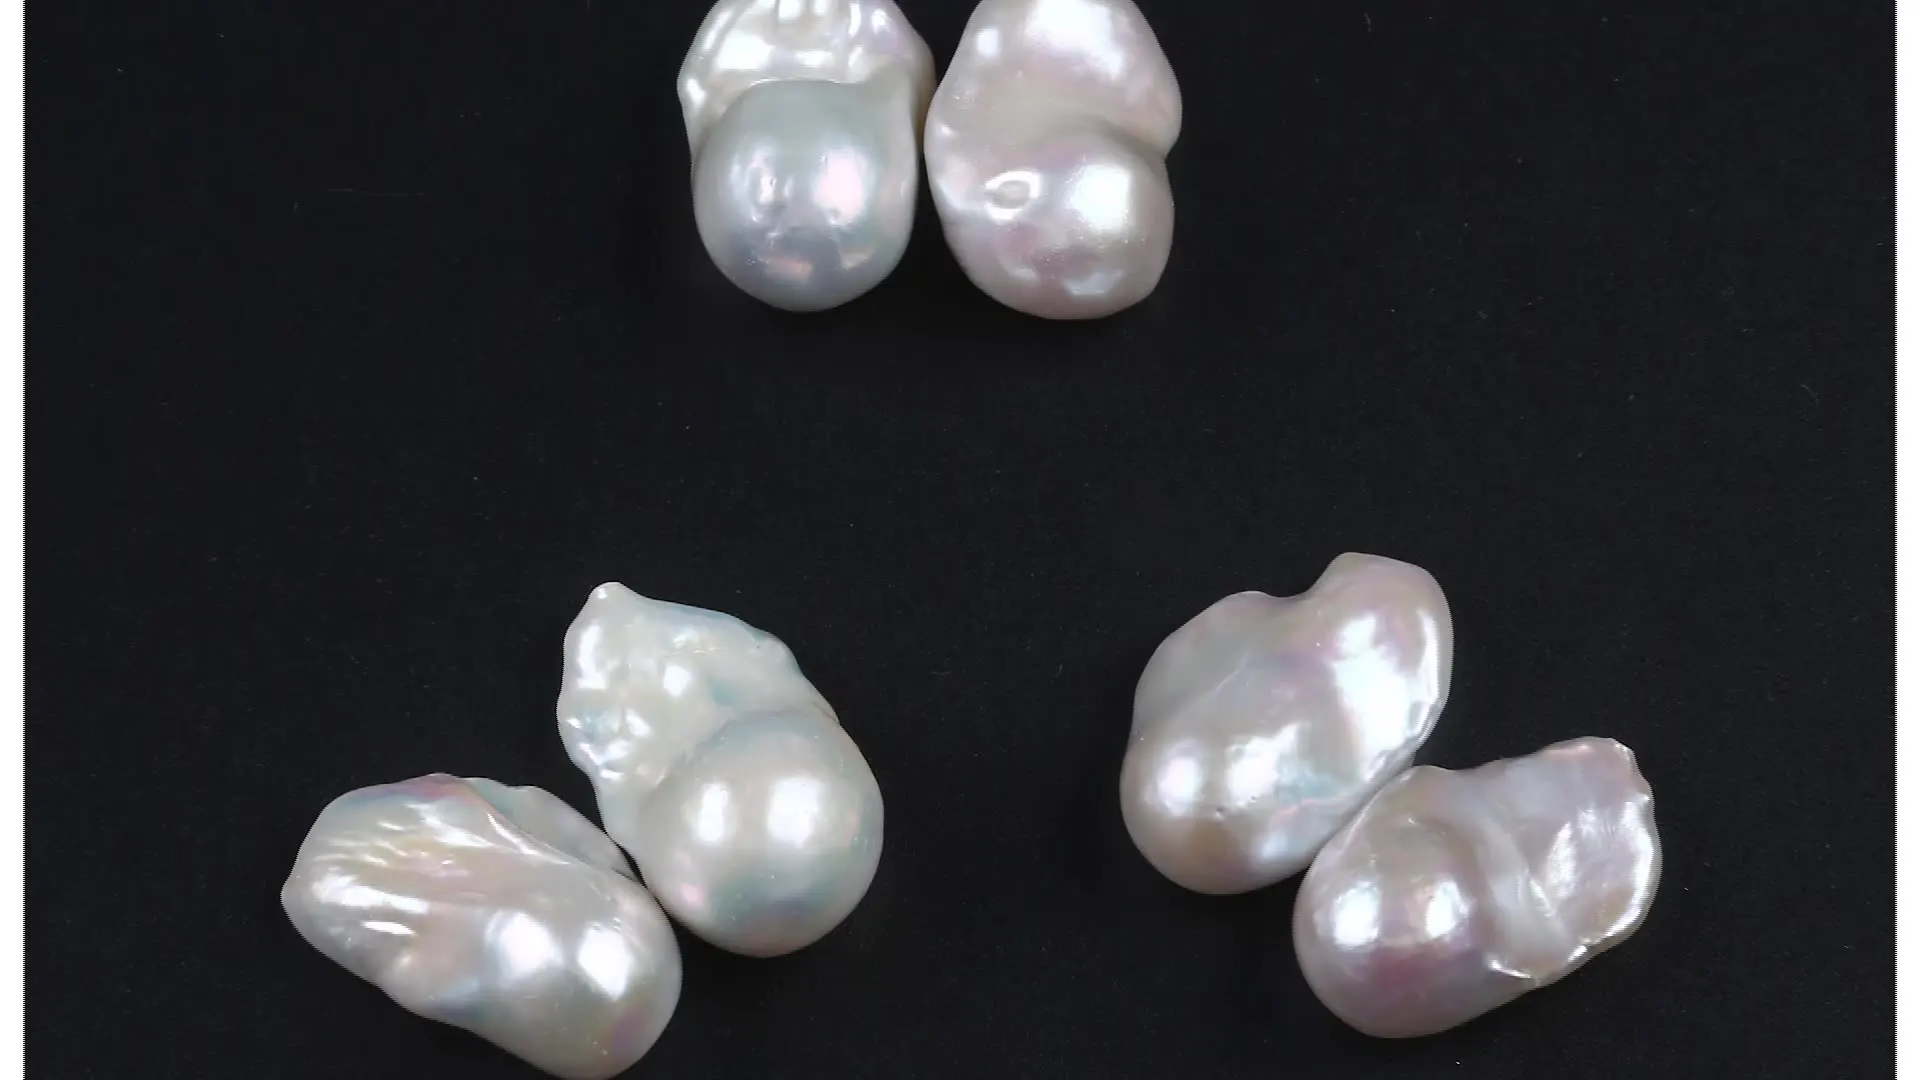 17-19mm natural freshwater  white big baroque shape pearl without hole loose beads for jewelry making